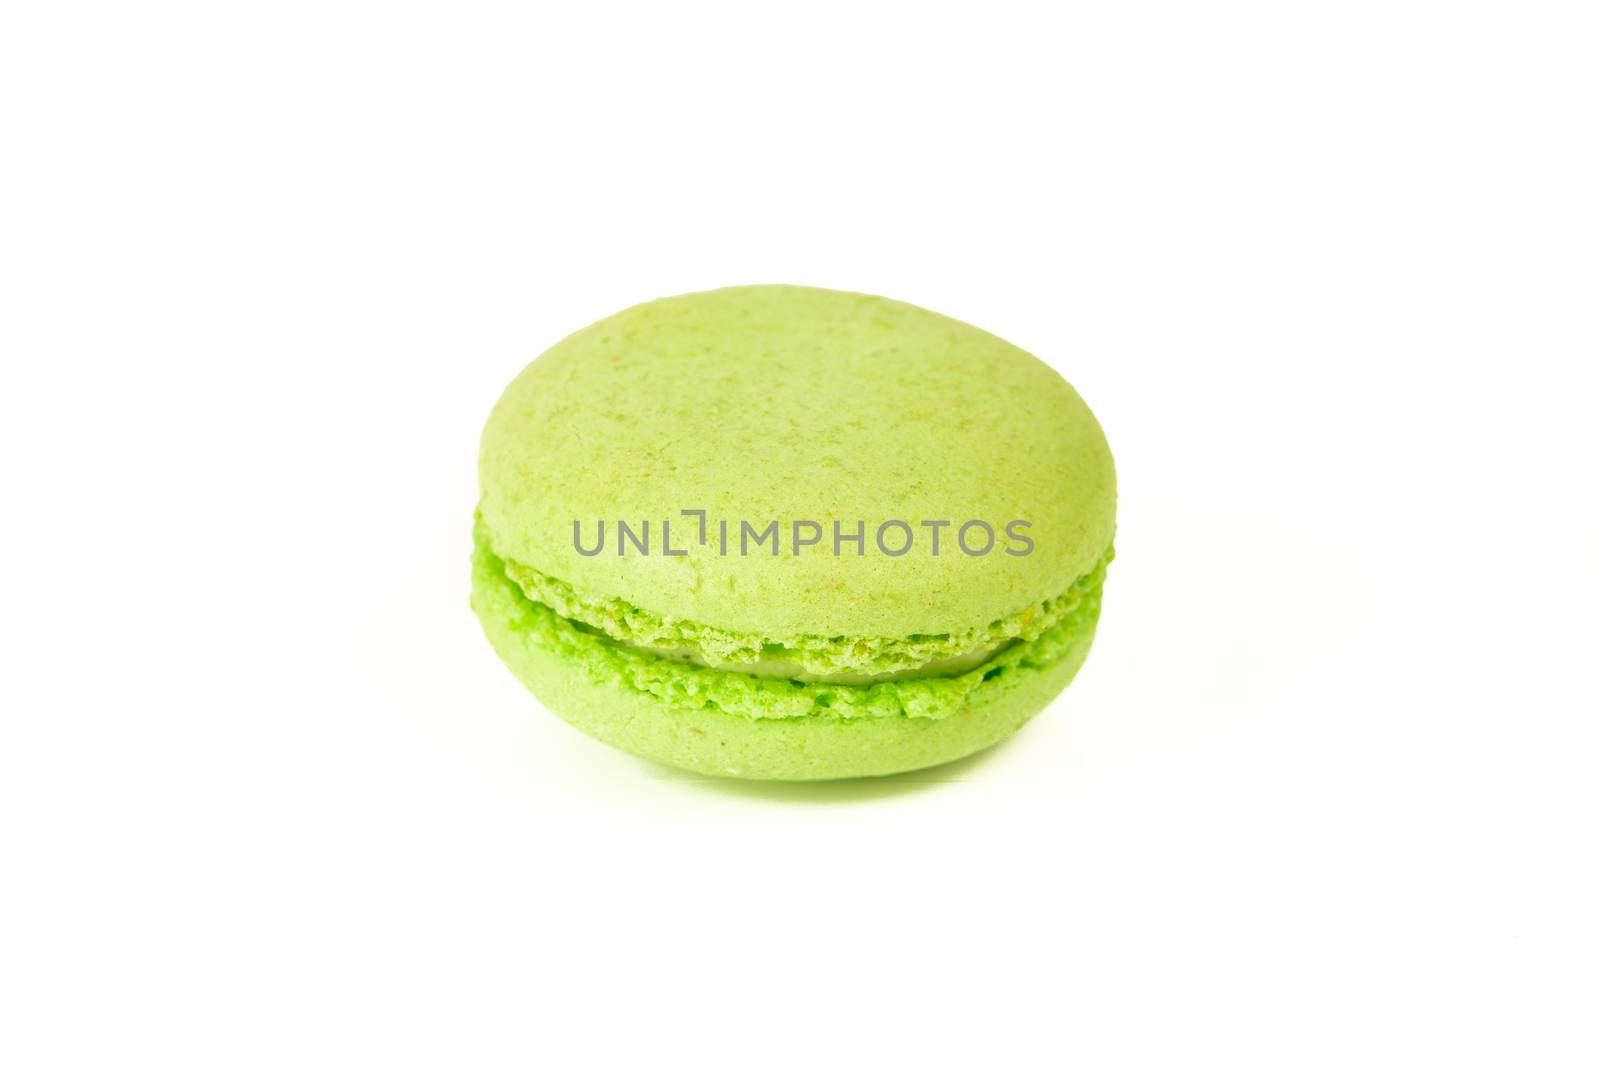 French colorful macarons by CatherineL-Prod